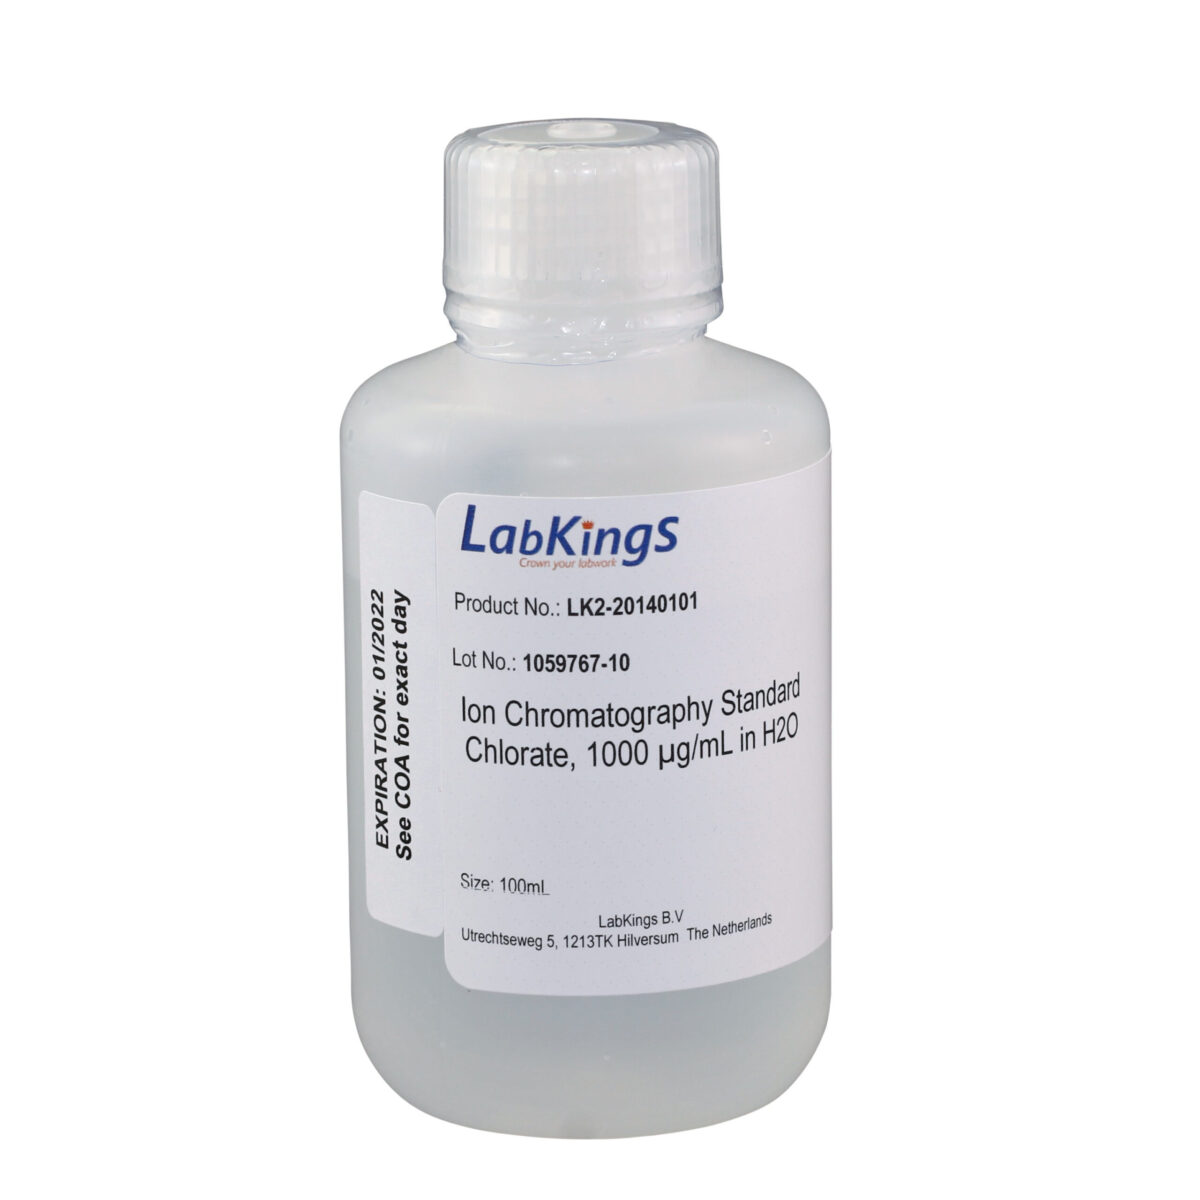 Chlorate, 1000 mg/L, Ion Chromatography Standard, in H2O, 250mL